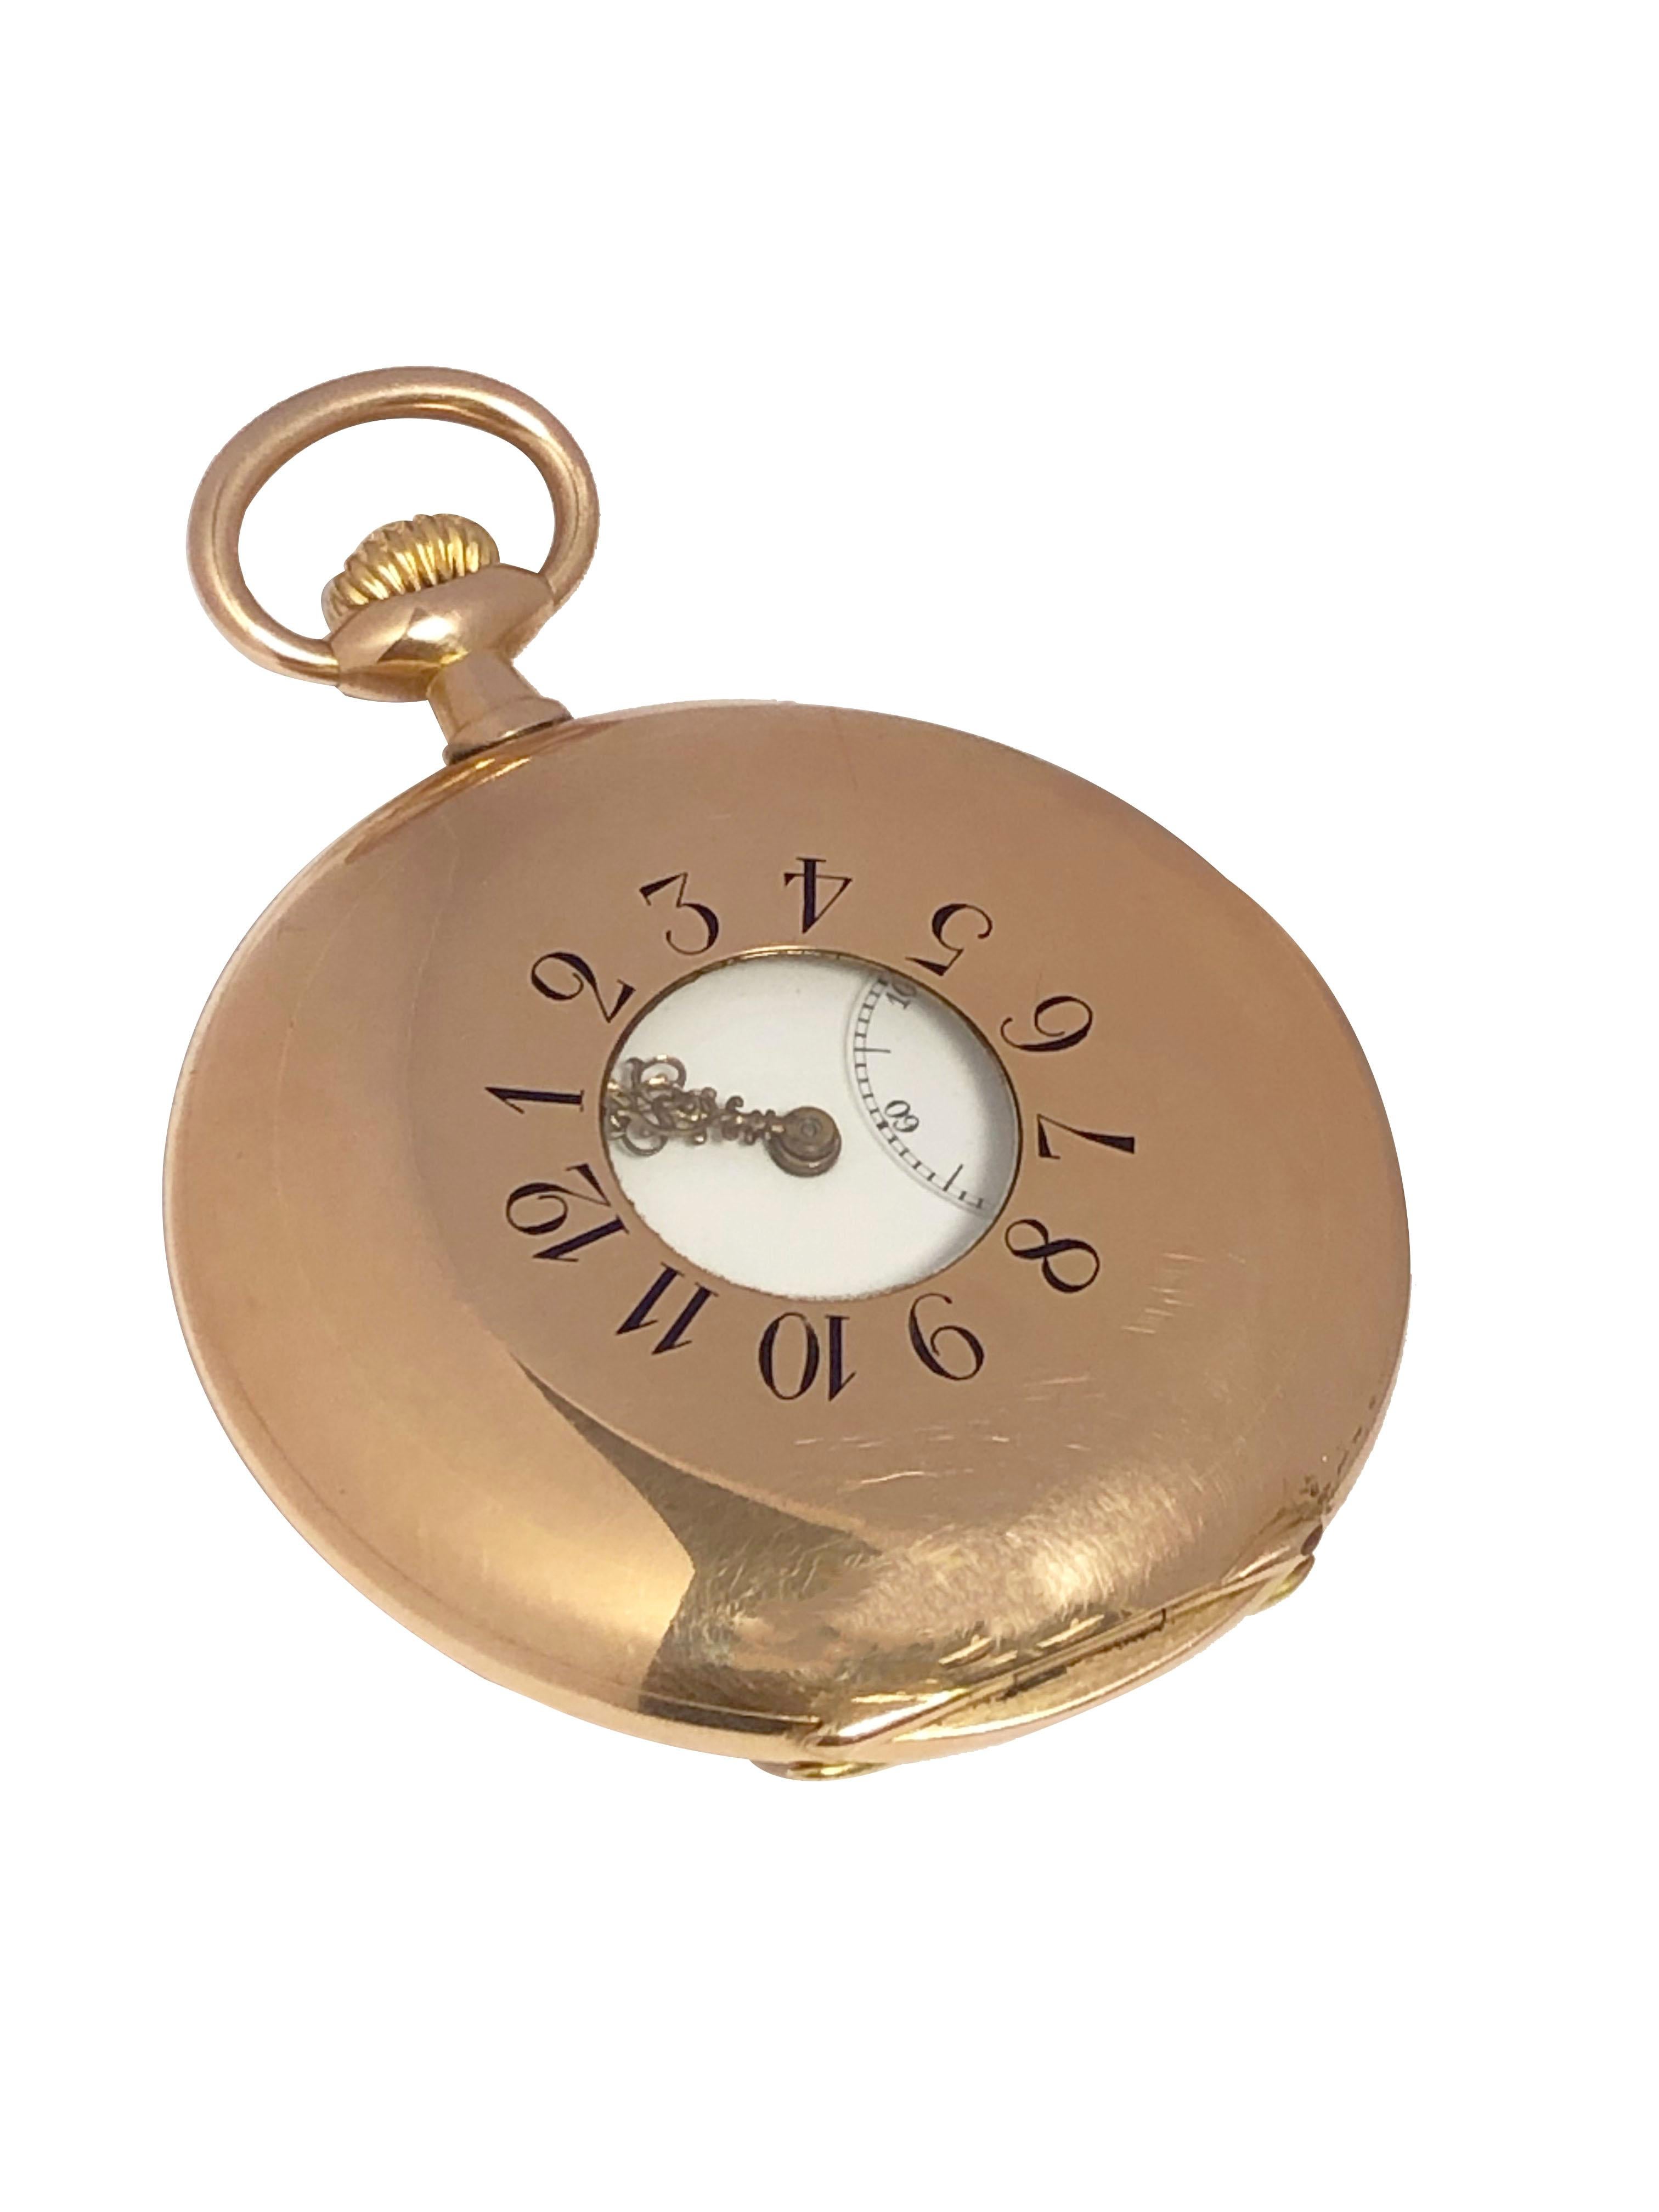 Circa 1910 Vacheron & Constantin Pocket watch, 14k Rose Gold 53 M.M Demi Hunter with inside Gold dust cover, Gilt lever movement, Porcelain dial with Gold Hands. Signed Vacheron Case and Movement, inside dust cover having an engraved presentation,